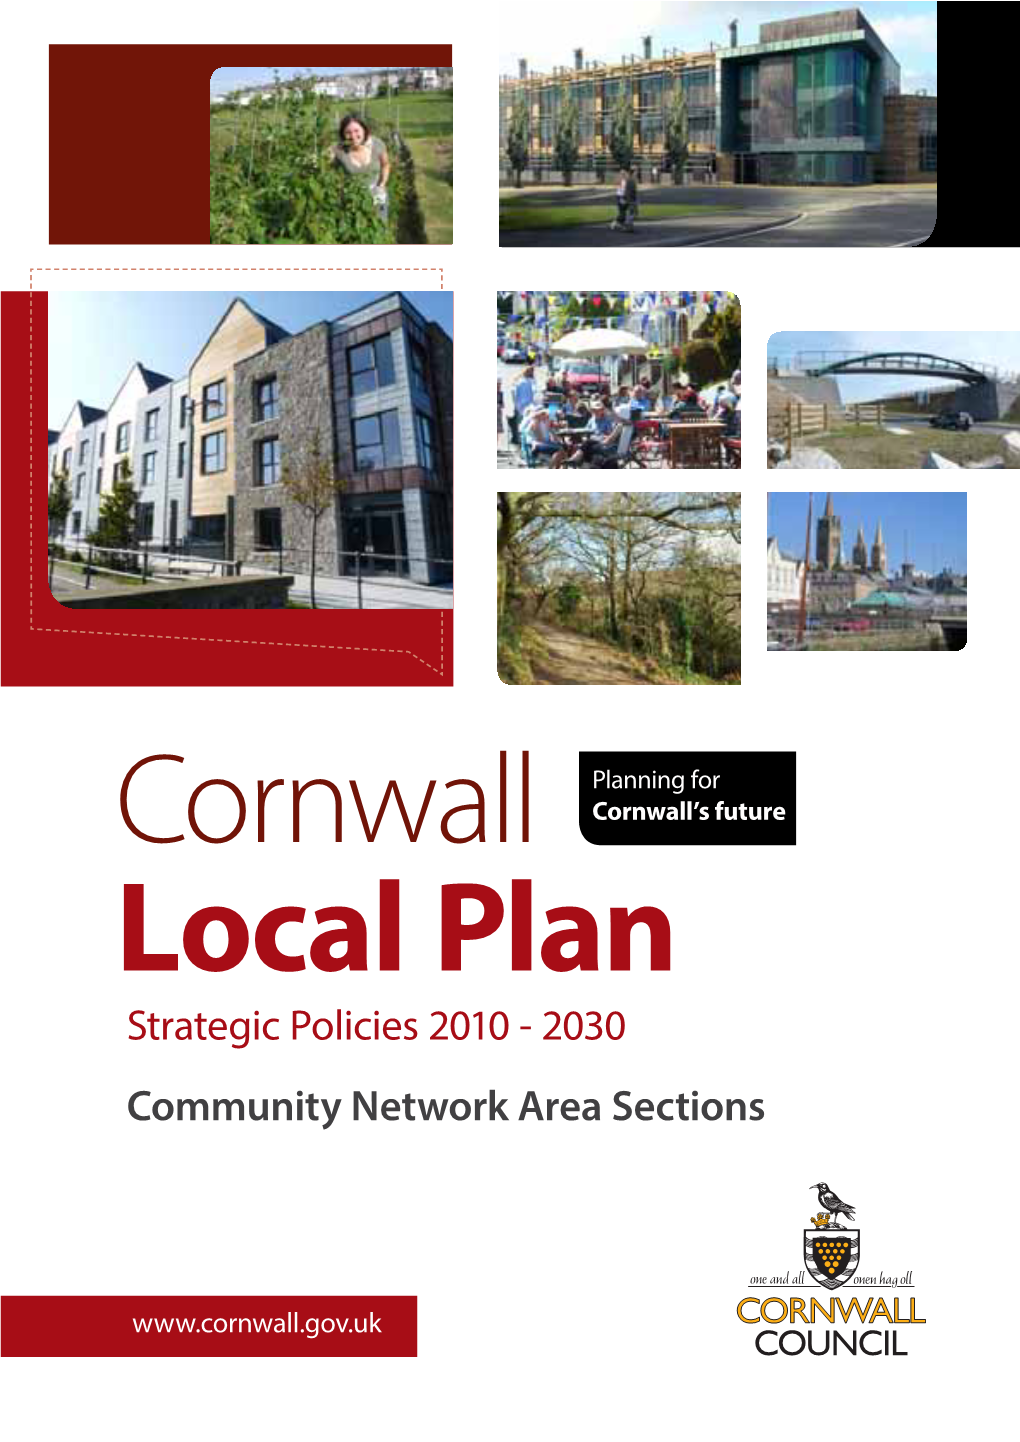 Cornwall Local Plan: Community Network Area Sections